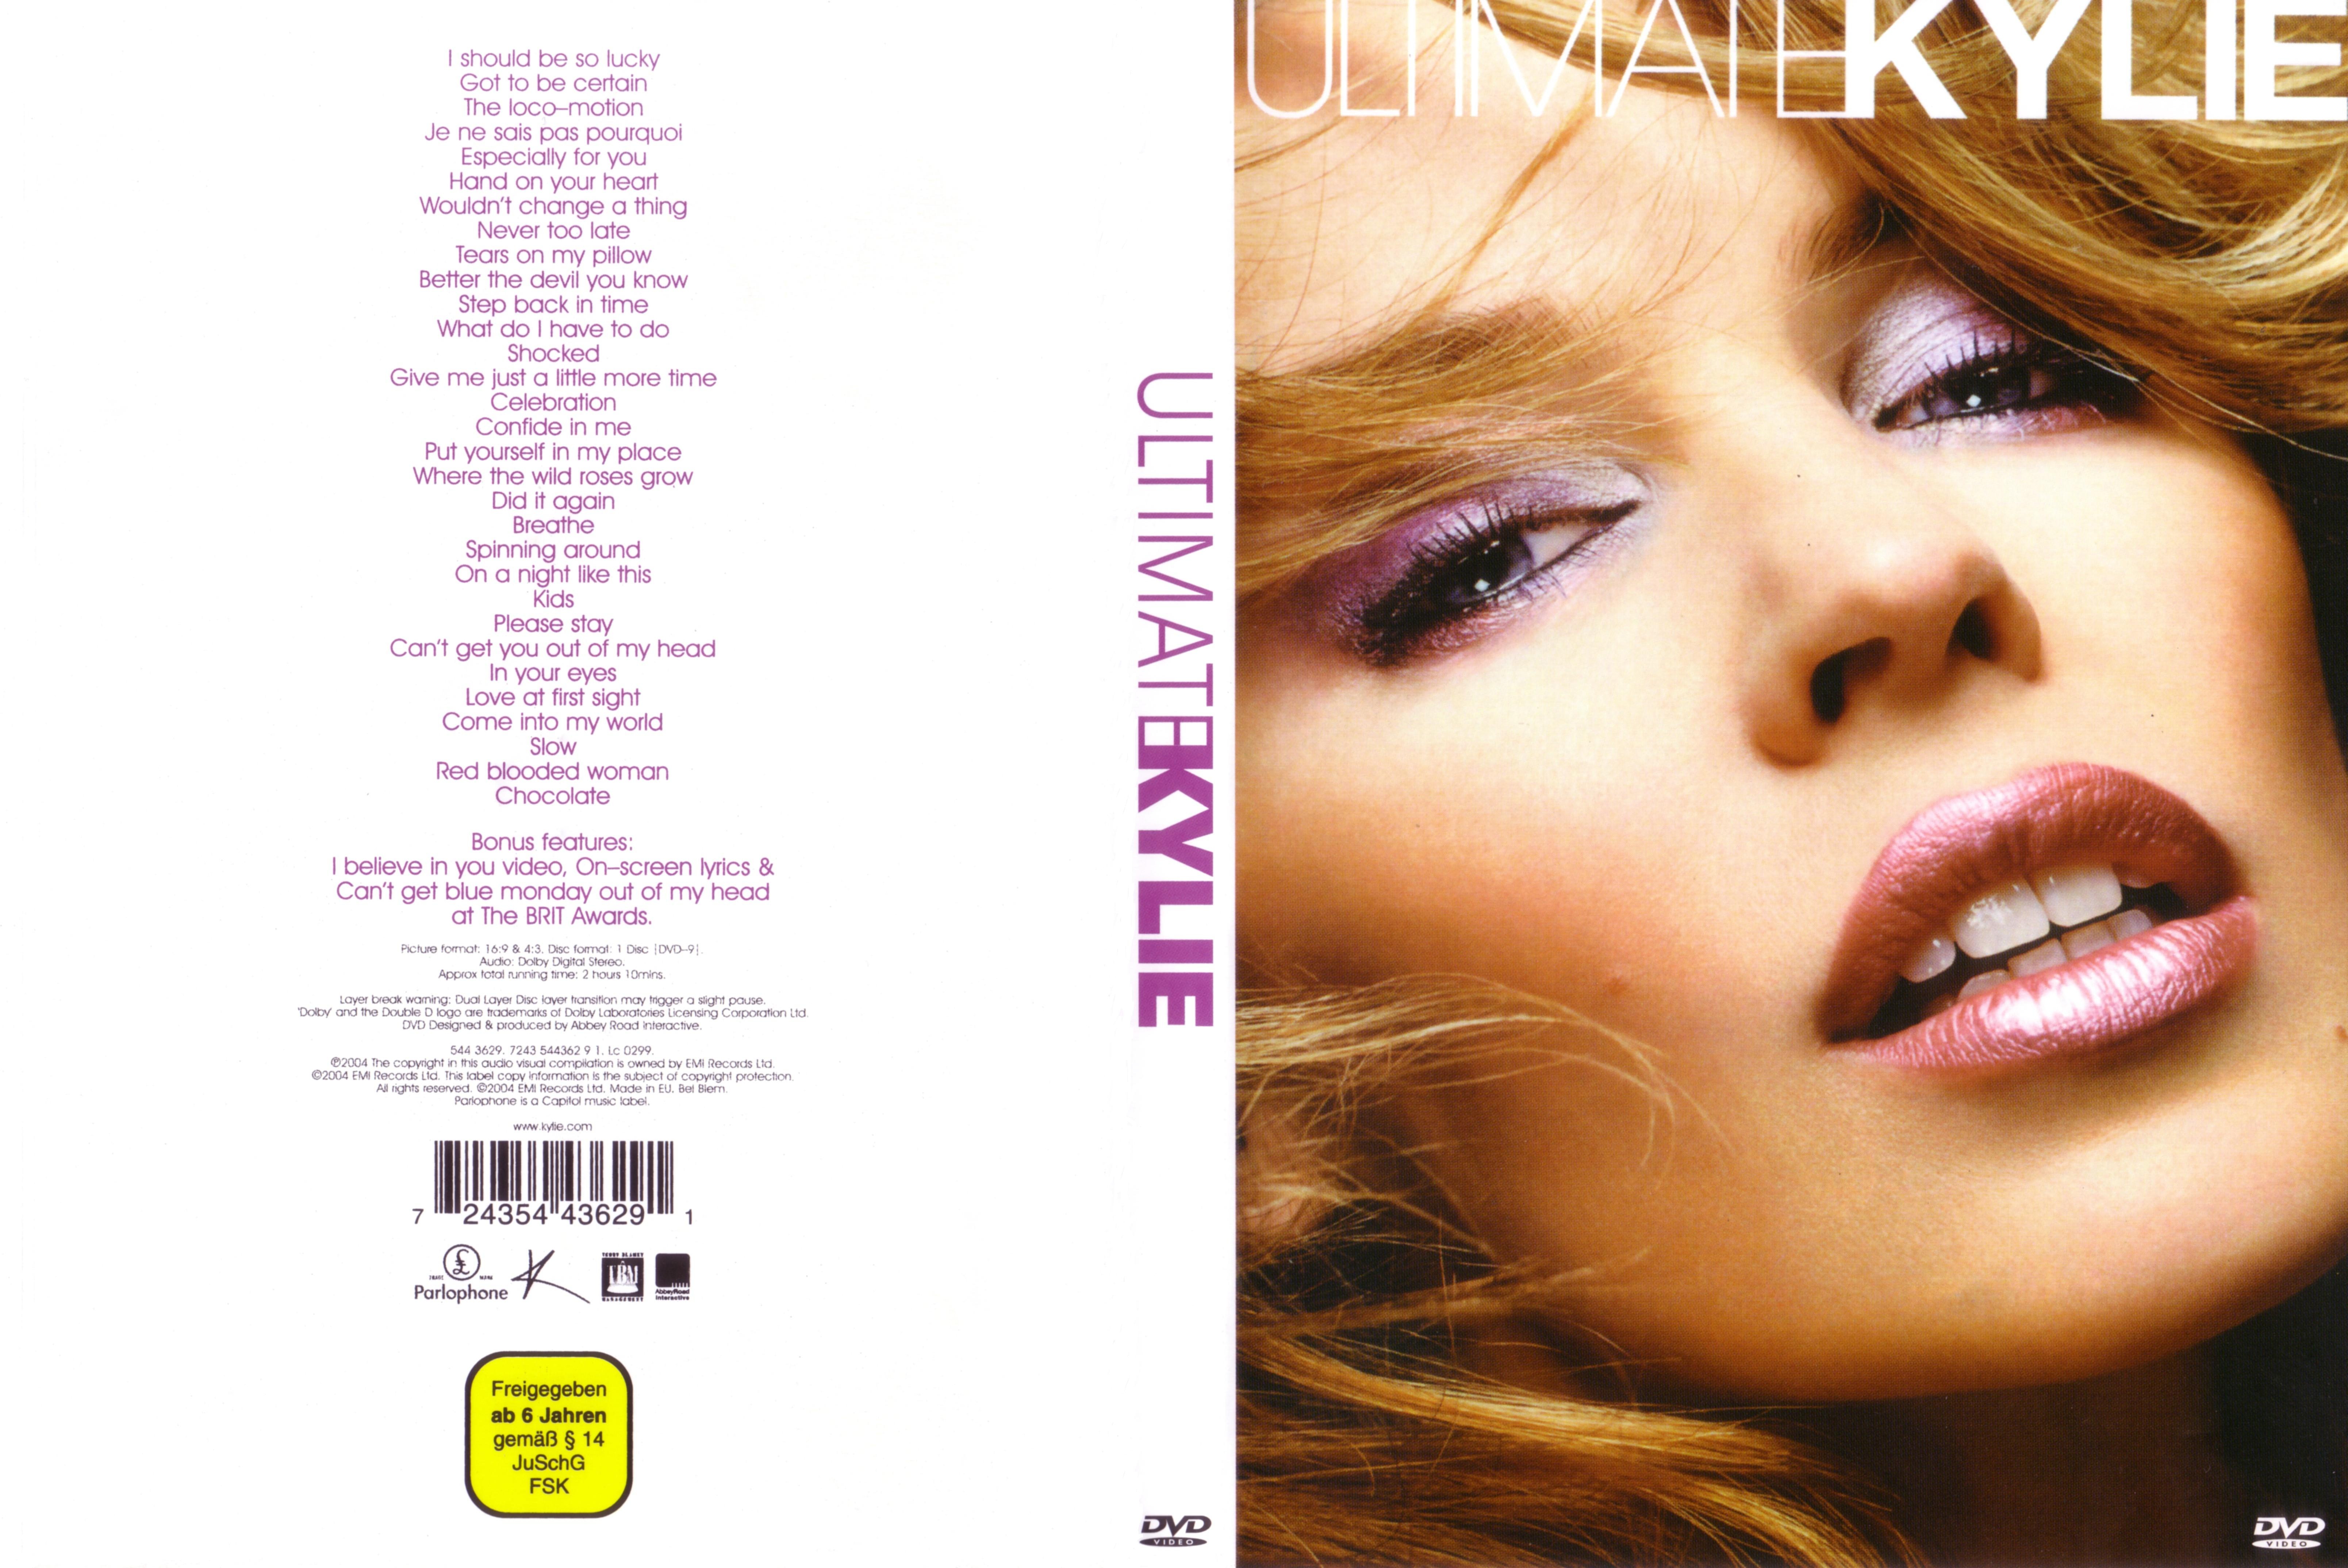 Jaquette DVD Kylie Minogue Ultimate